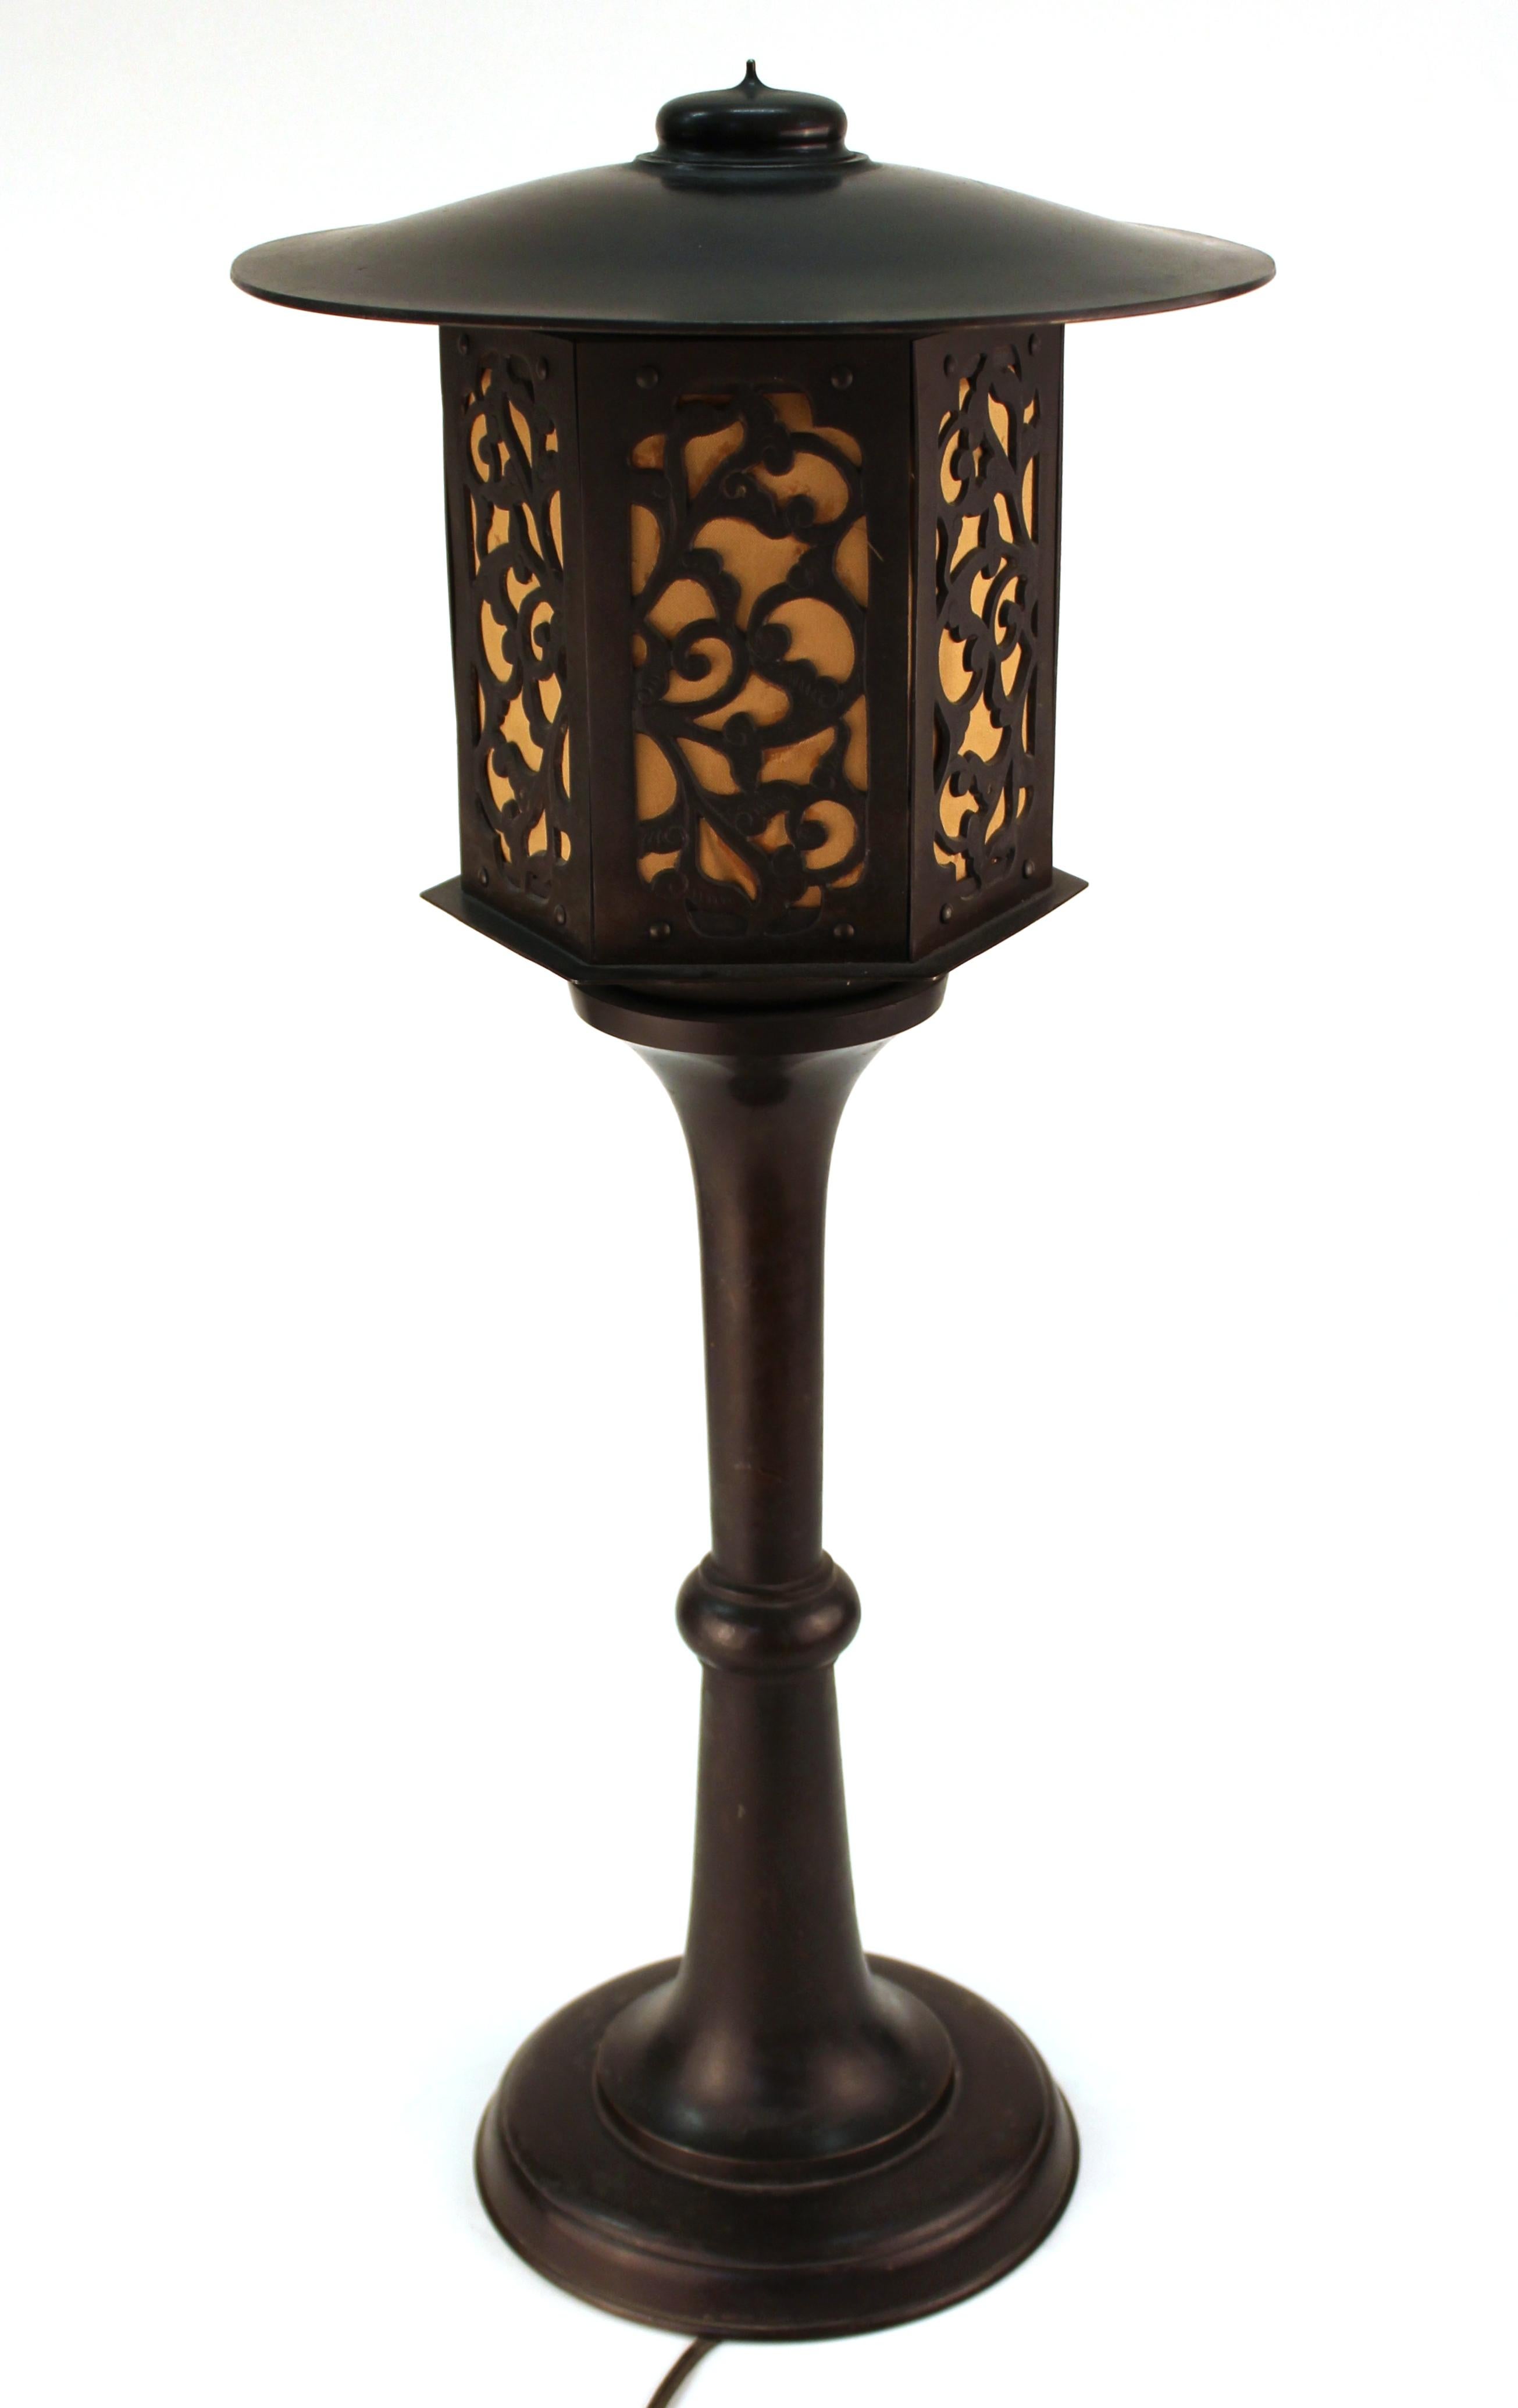 Japanese Meiji period table lamp in shape of a lantern. The piece is made in bronze and was made in Japan in the 19th century. In great vintage condition with age-appropriate patina.